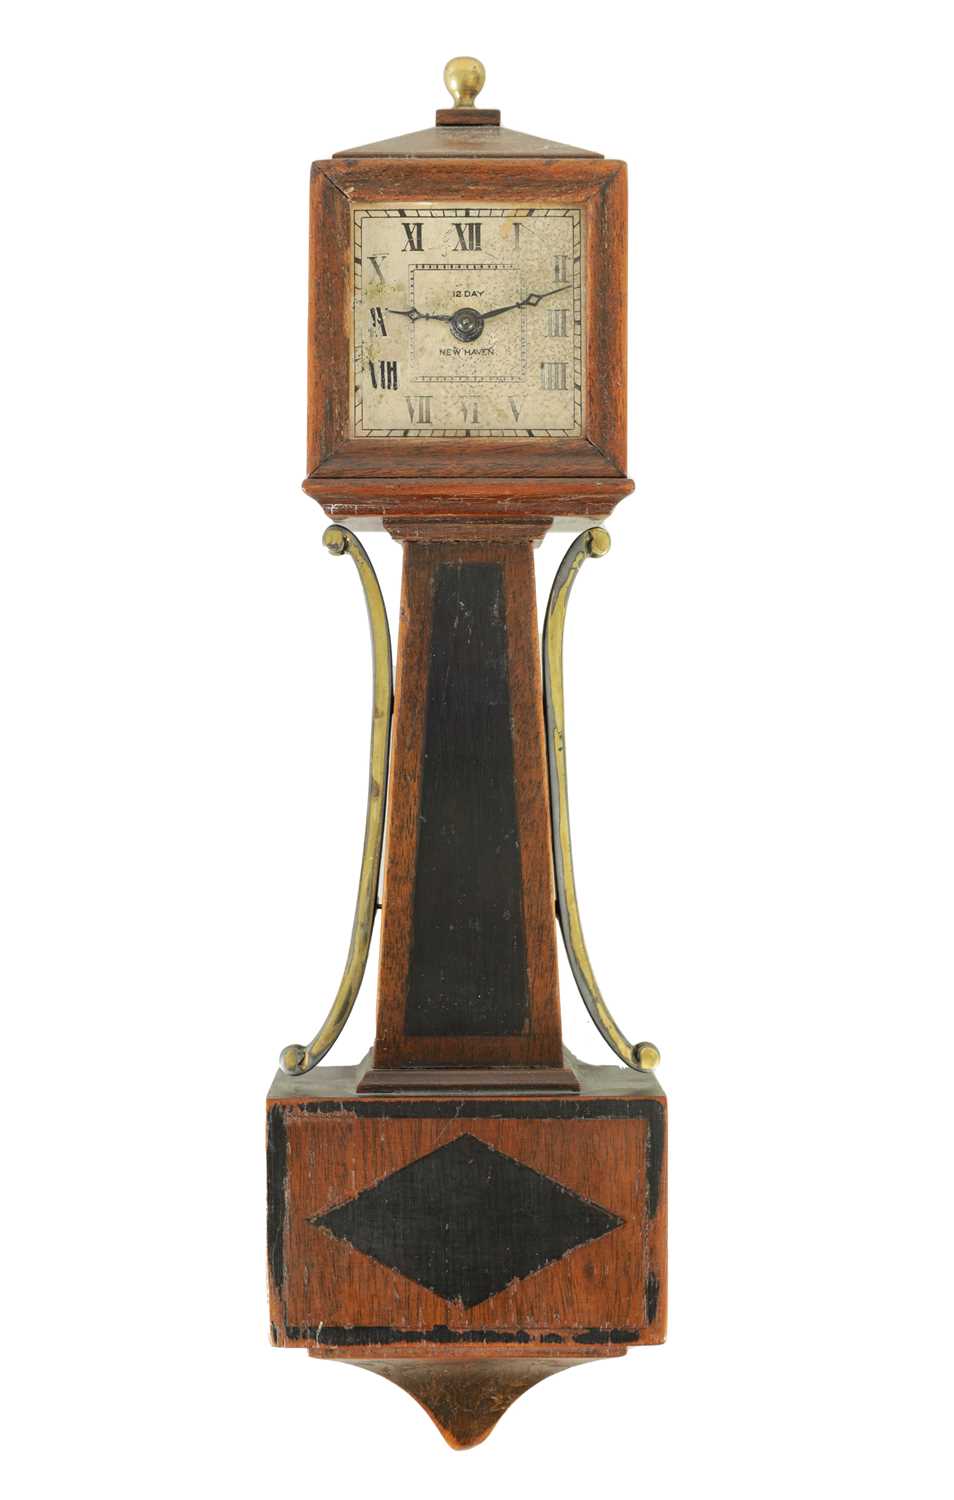 AN EARLY 20TH CENTURY MINIATURE AMERICAN WALL CLOCK